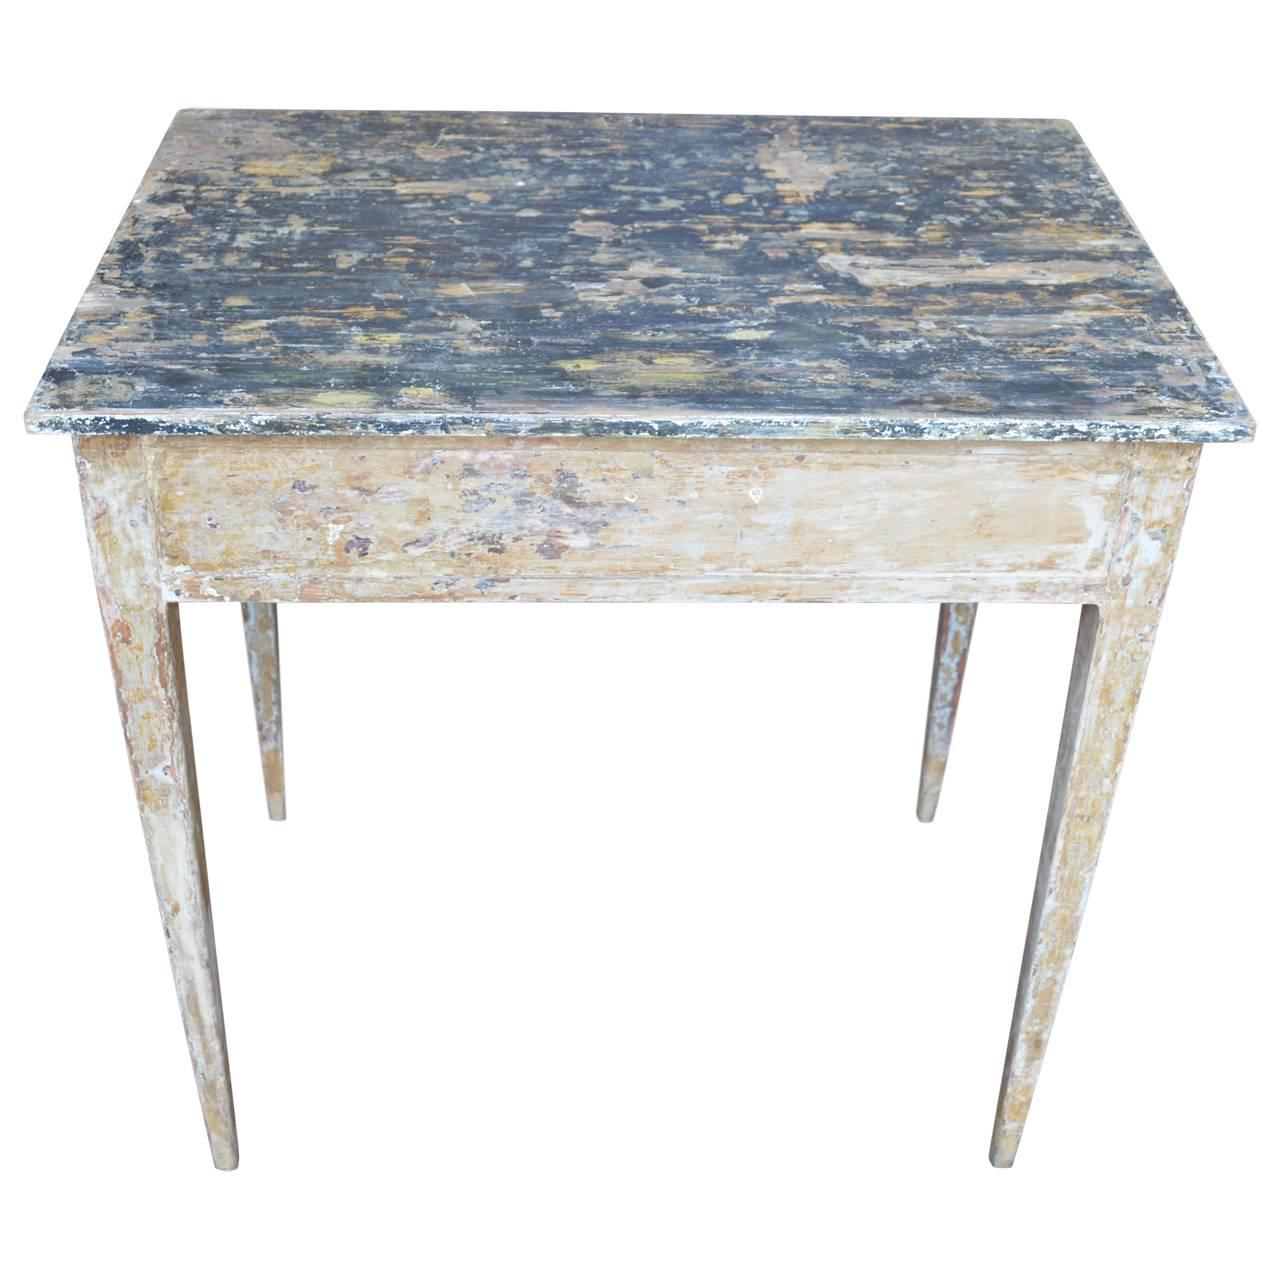 Painted Late 18th Century Gustavian End Table